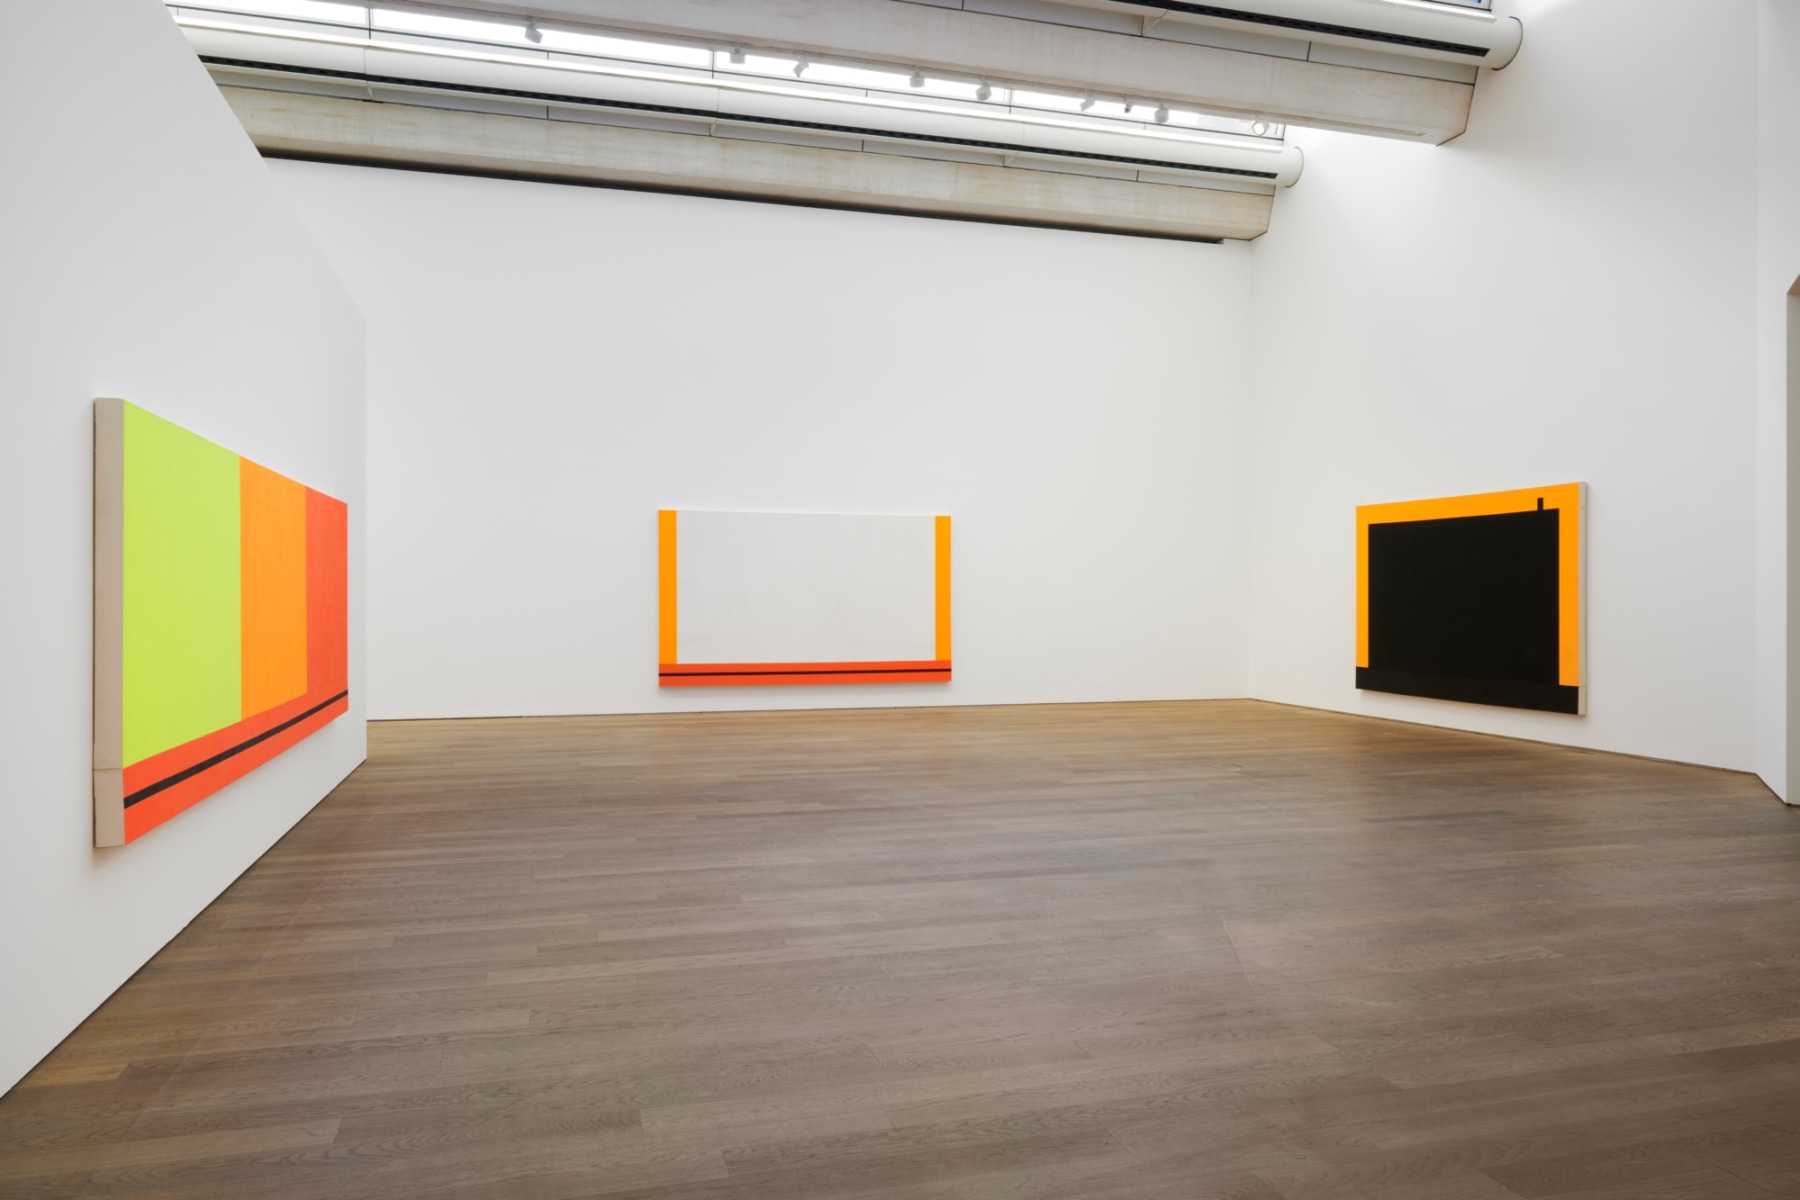 Peter Halley: Conduits. Paintings from the 1980s - Mudam Luxembourg - Musée d'Art Moderne Grand-Duc Jean, Luxembourg - News - Lopez de la Serna CAC